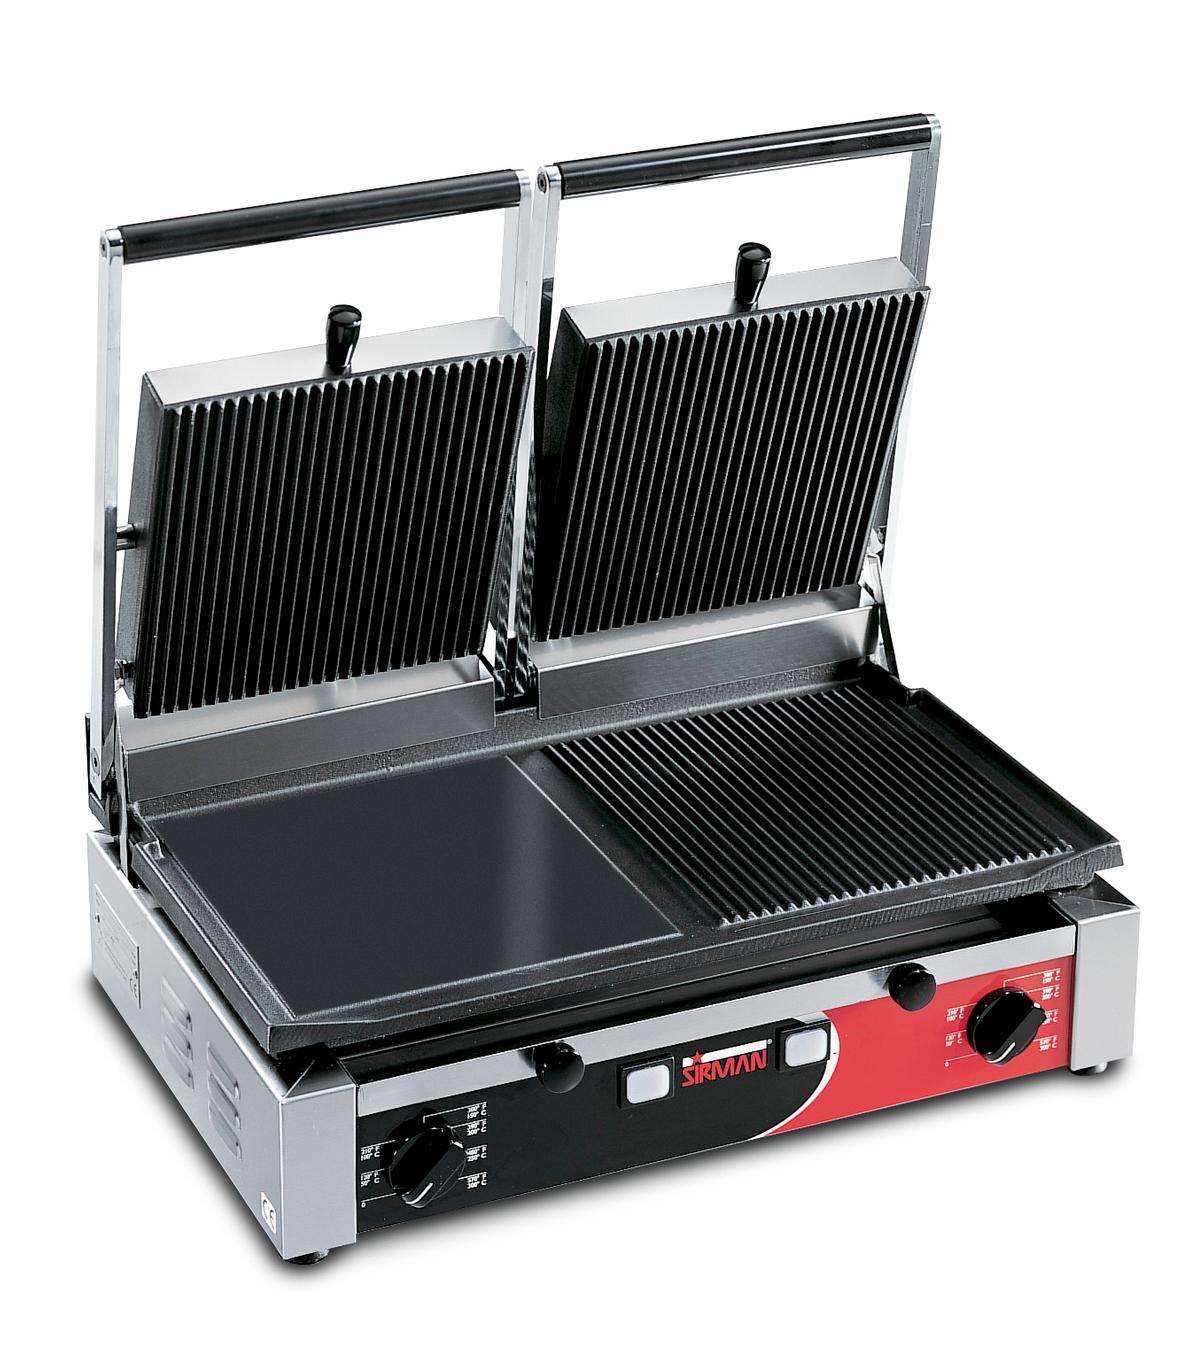 Galaxy P65SG Single Panini Grill w/ Grooved & Smooth Plates